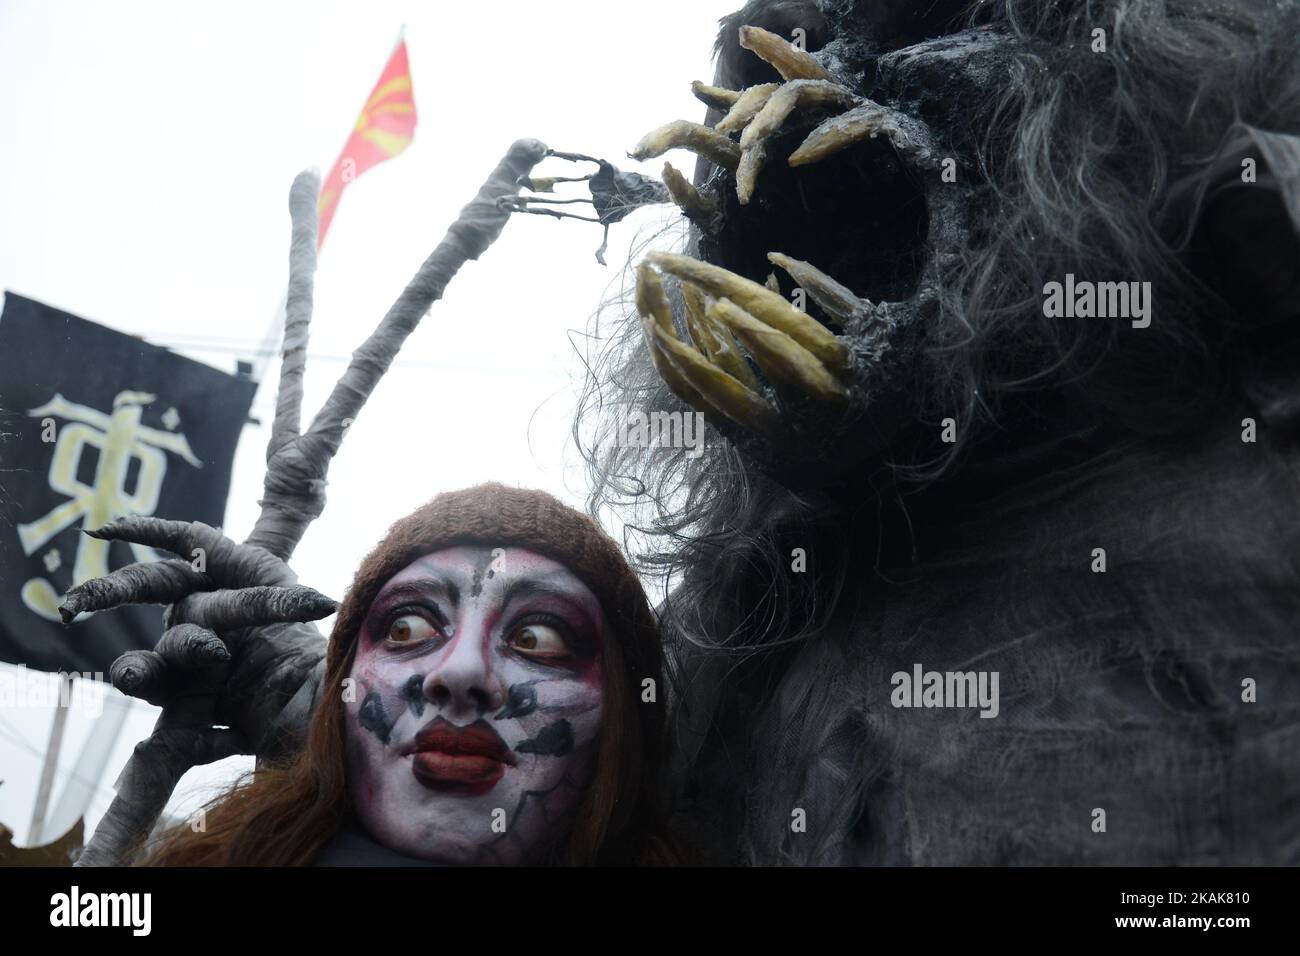 Local villagers wearing homemade costumes parade during a carnival celebration marking the Orthodox St. Vasilij Day in the village of Vevcani, about 170 km from the capital of Skopje, The Former Yugoslav Republic of Macedonia on 13 January 2017. The Vevcani Carnival is one of the most famous village festivals in the Balkans. It is believed that the custom is over 1,400 years old. (Photo by Borce Popovski/NurPhoto) *** Please Use Credit from Credit Field *** Stock Photo